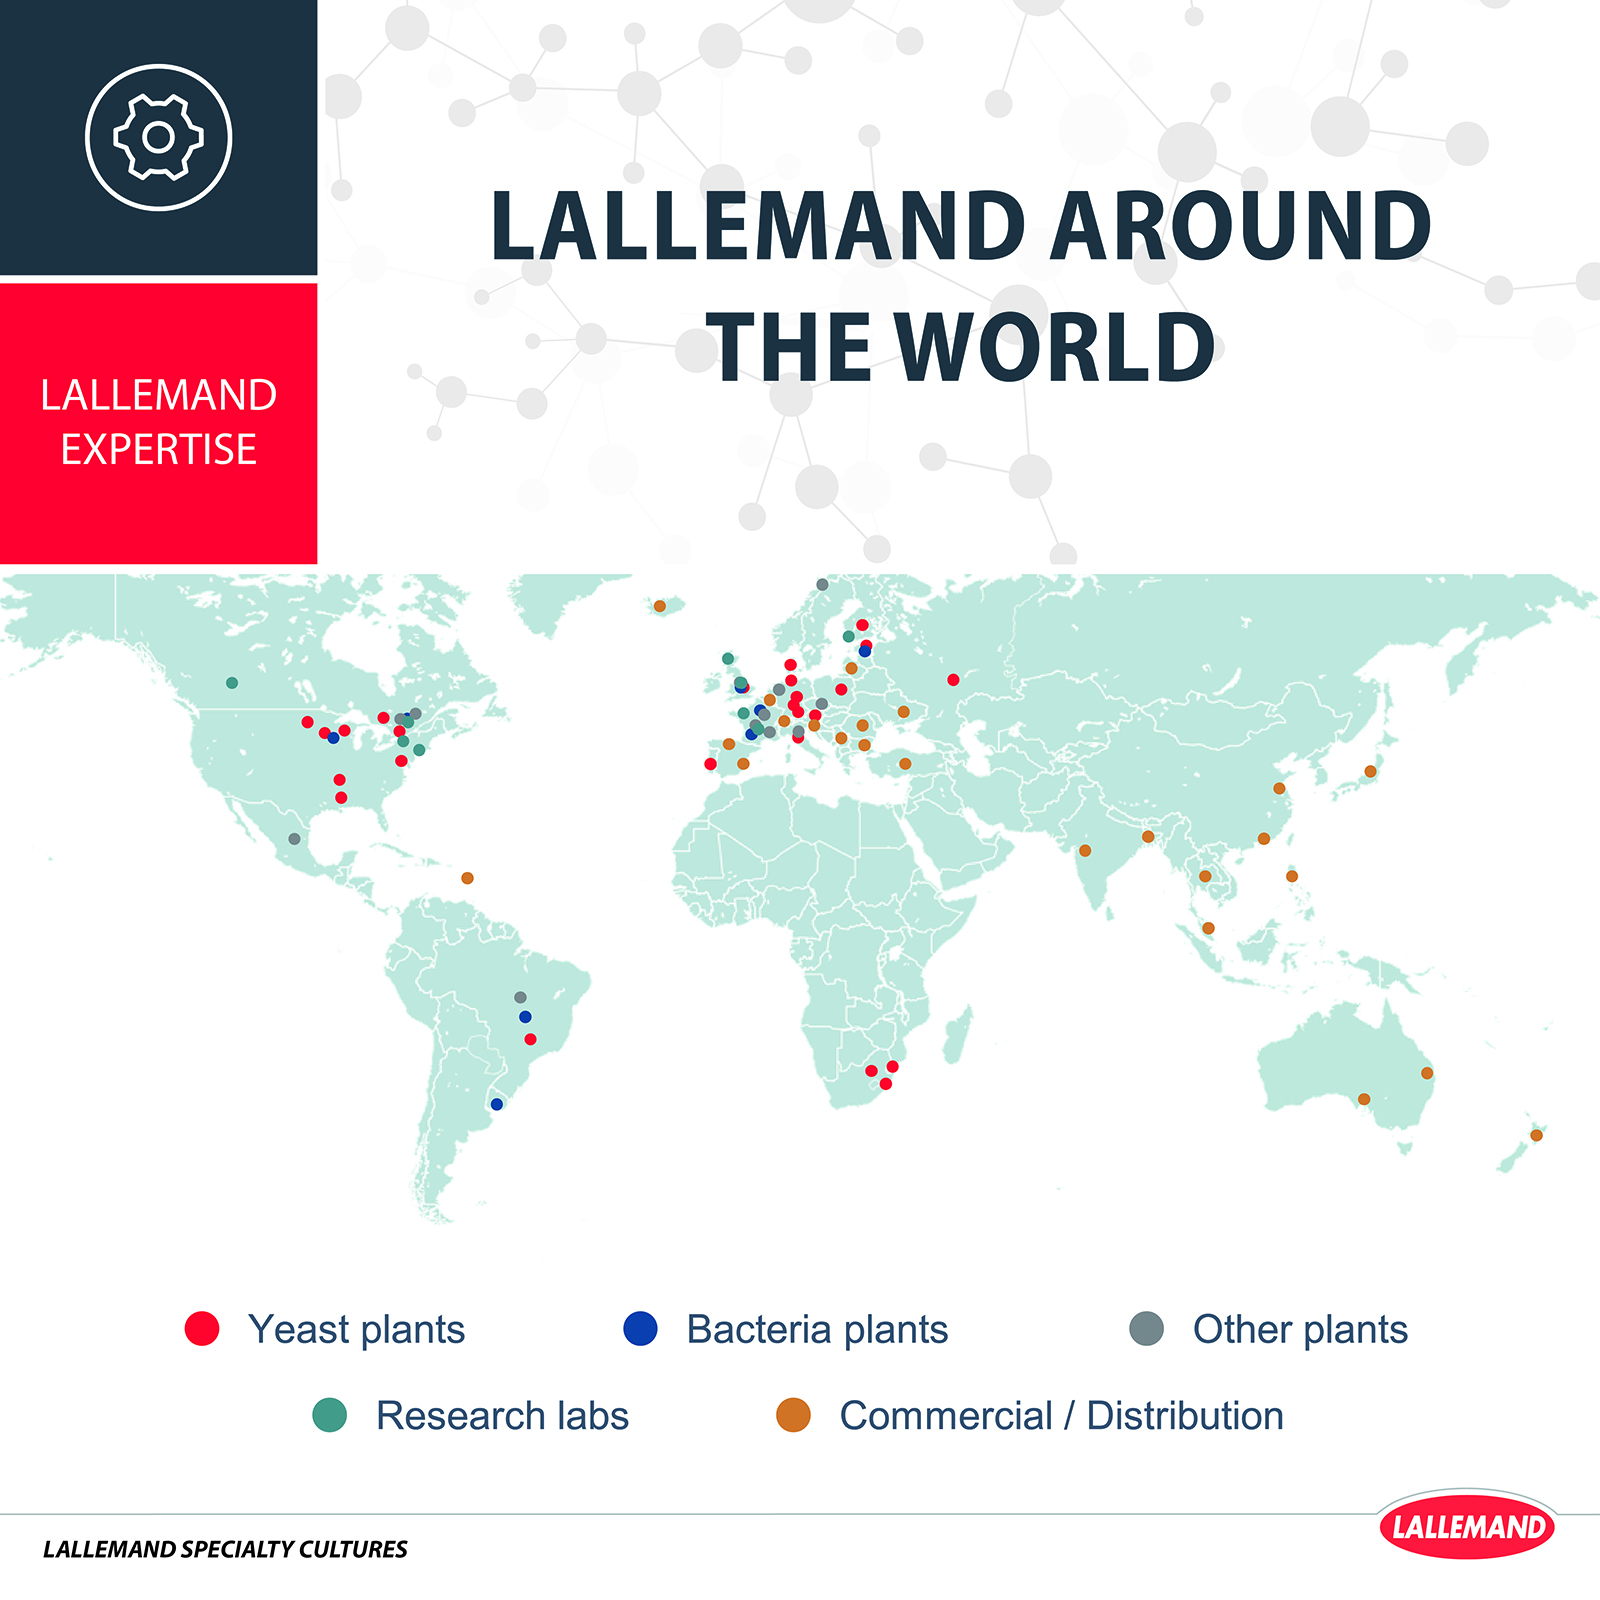 Lallemand’s market coverage